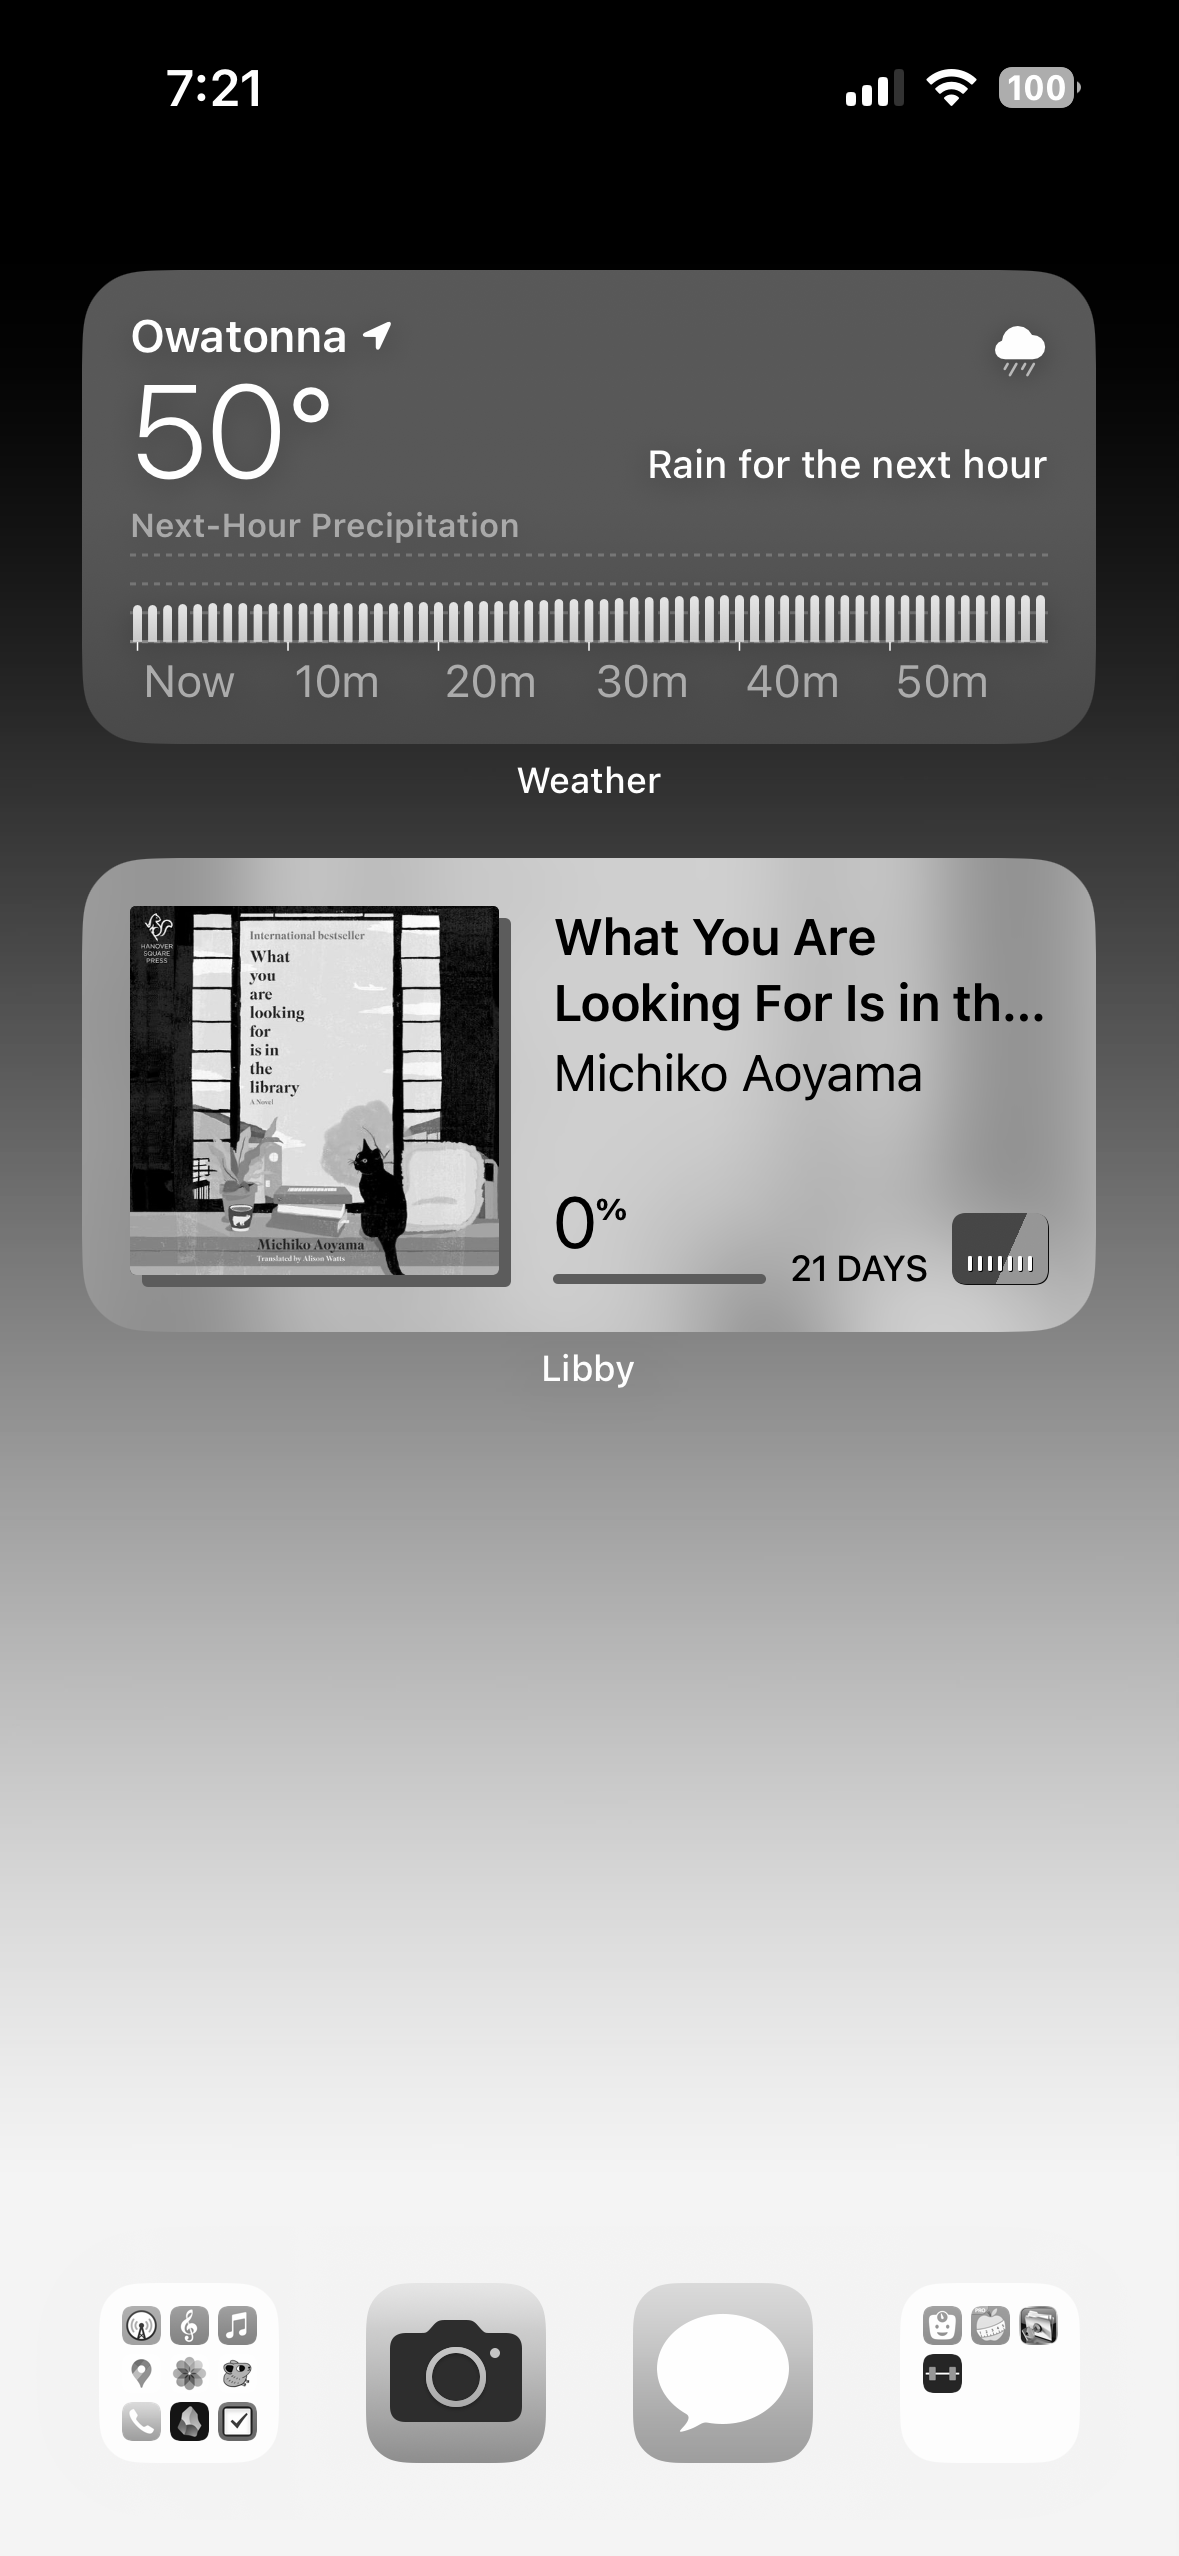 A minimal iOS home screen with weather and libby witdgets and 4 icons along the bottom